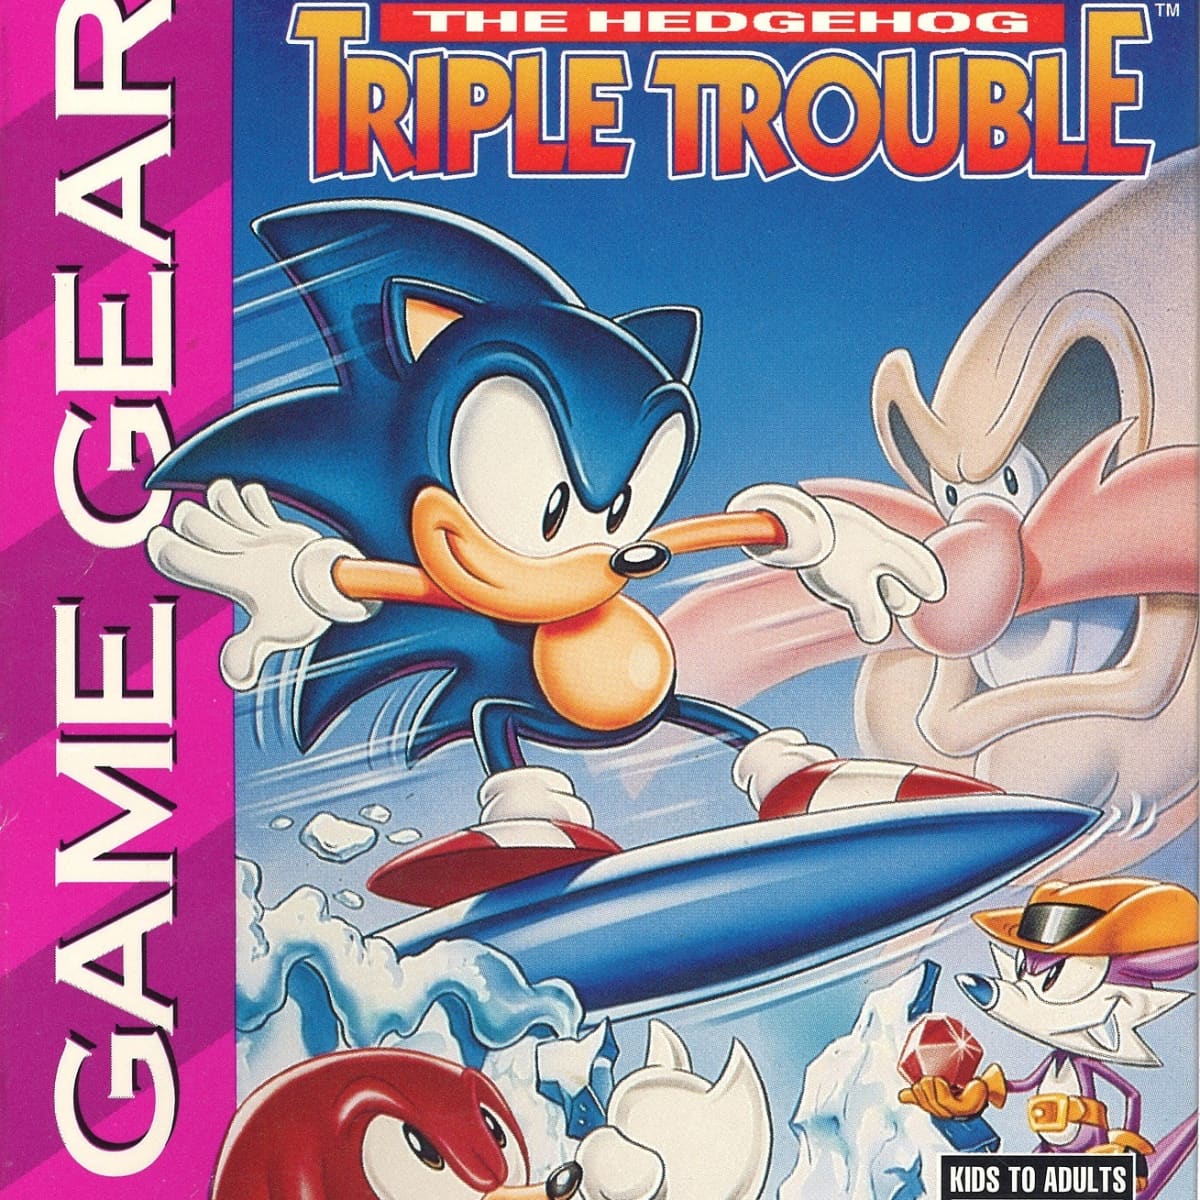 Silver Sonic on the Game gear was technically the first robot